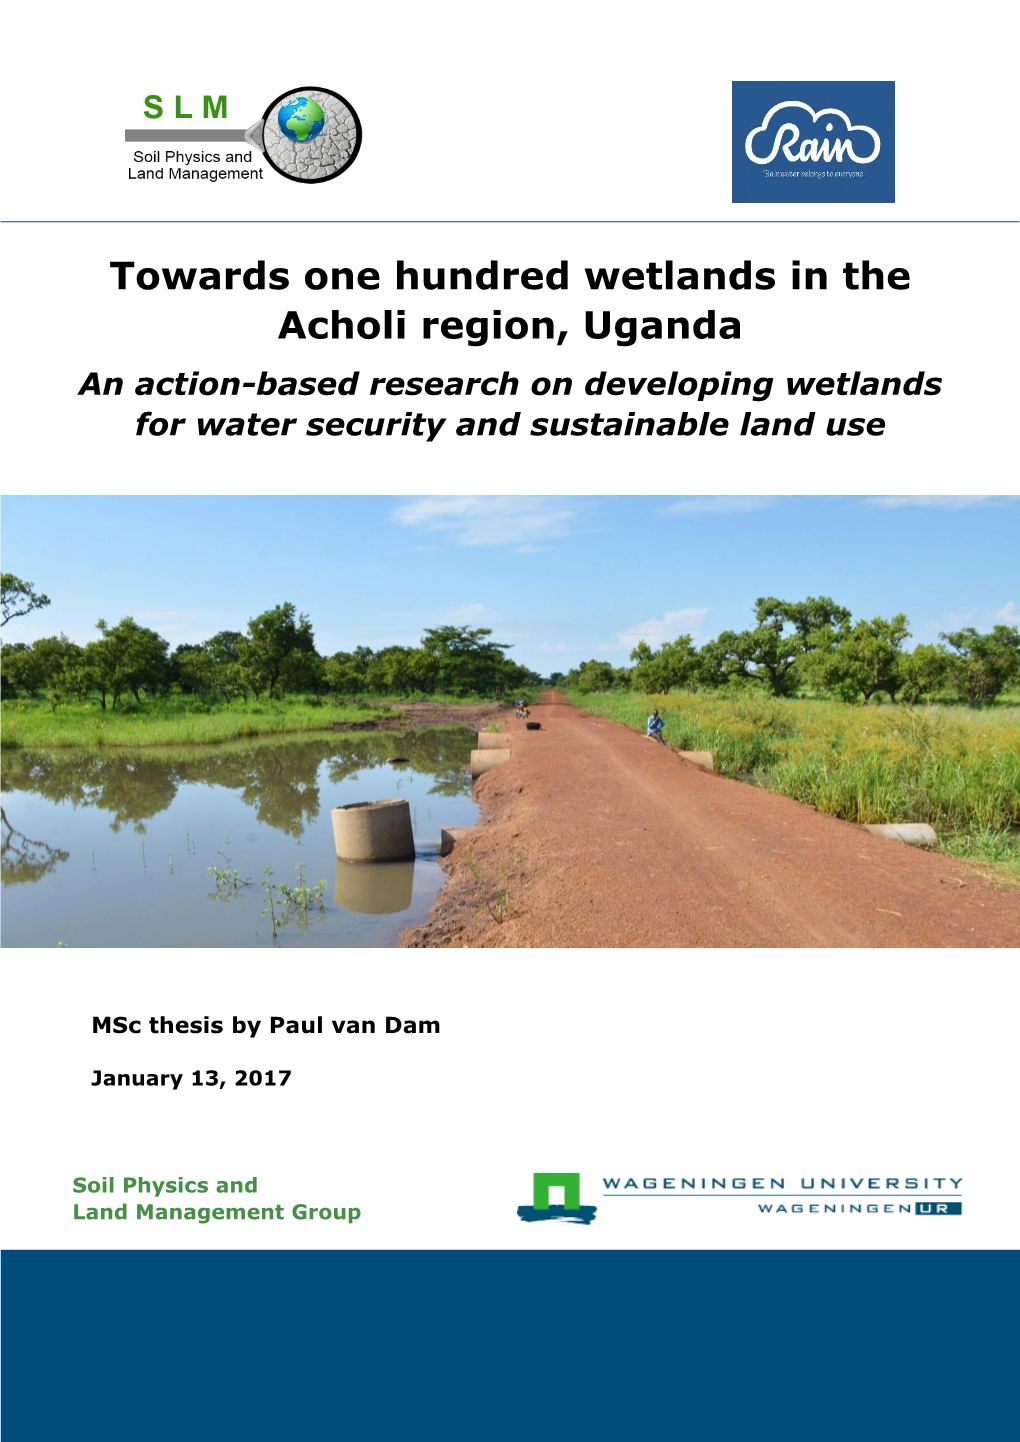 Towards One Hundred Wetlands in the Acholi Region, Uganda an Action-Based Research on Developing Wetlands for Water Security and Sustainable Land Use